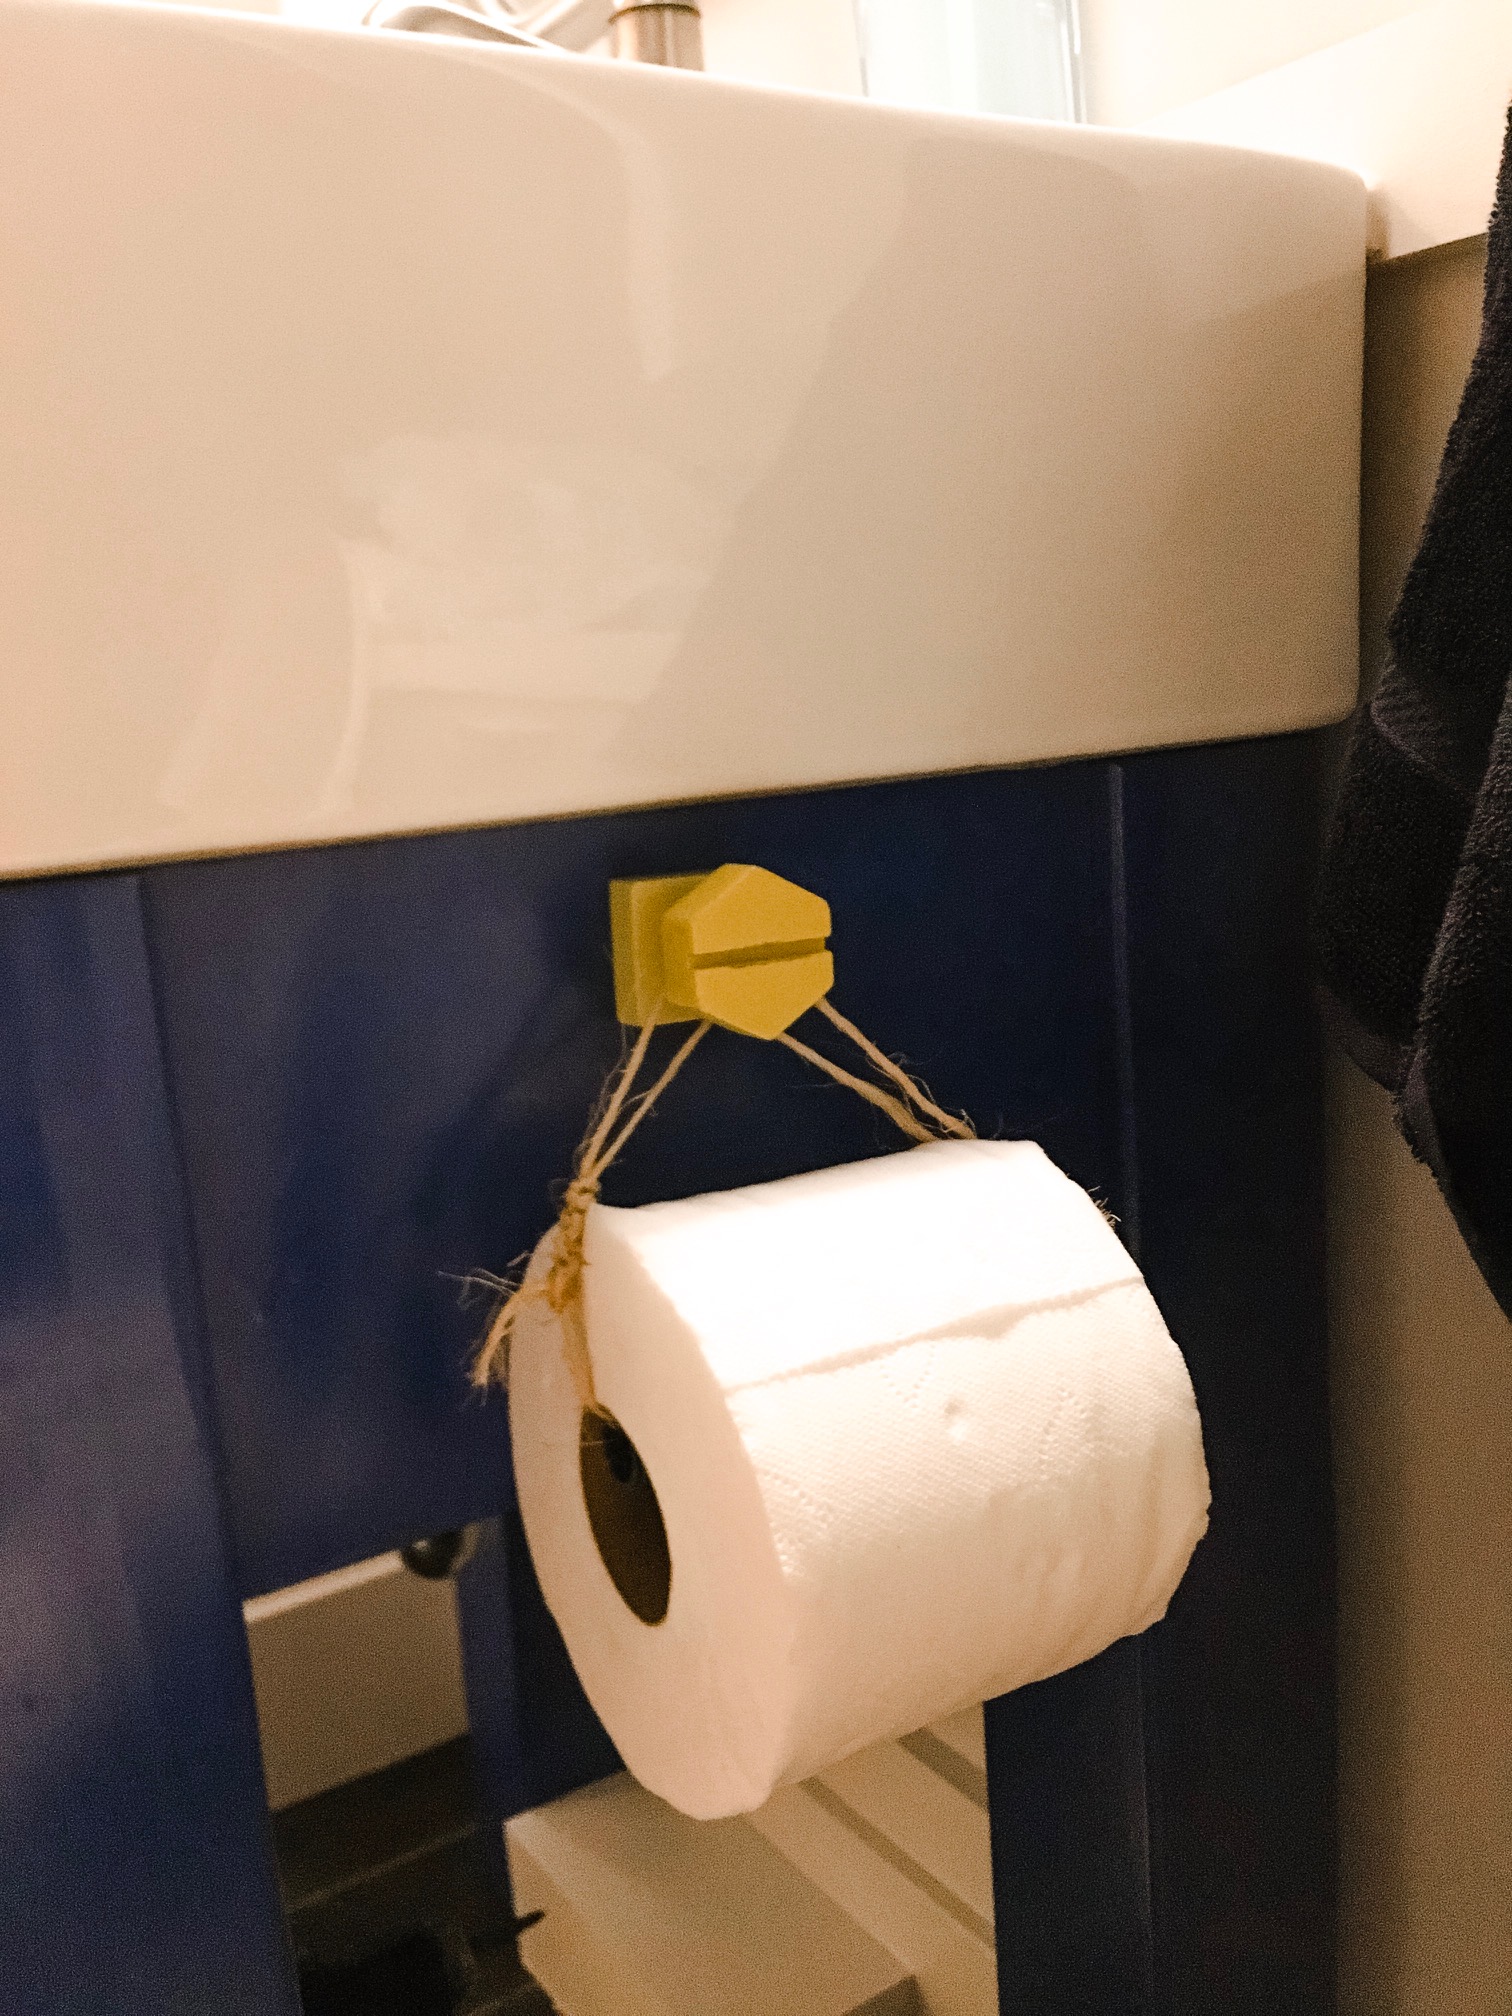 Easy, Cute and Cheap Kid’s bathroom Toilet Paper Roll Holder